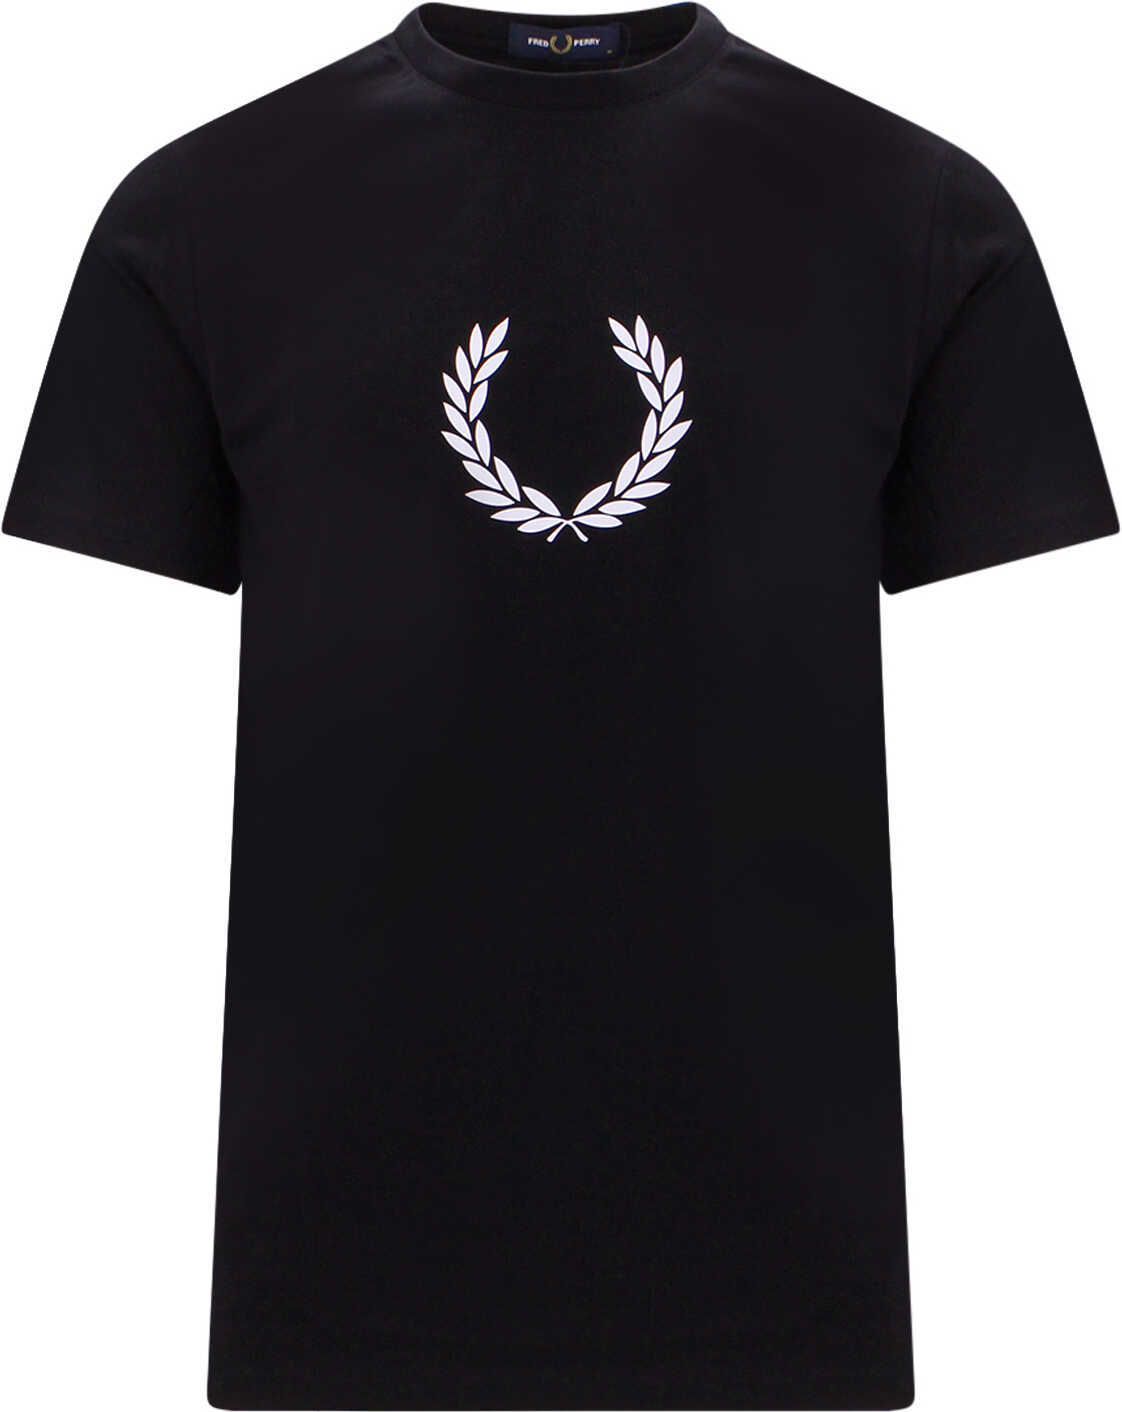 Fred Perry T-Shirt Black